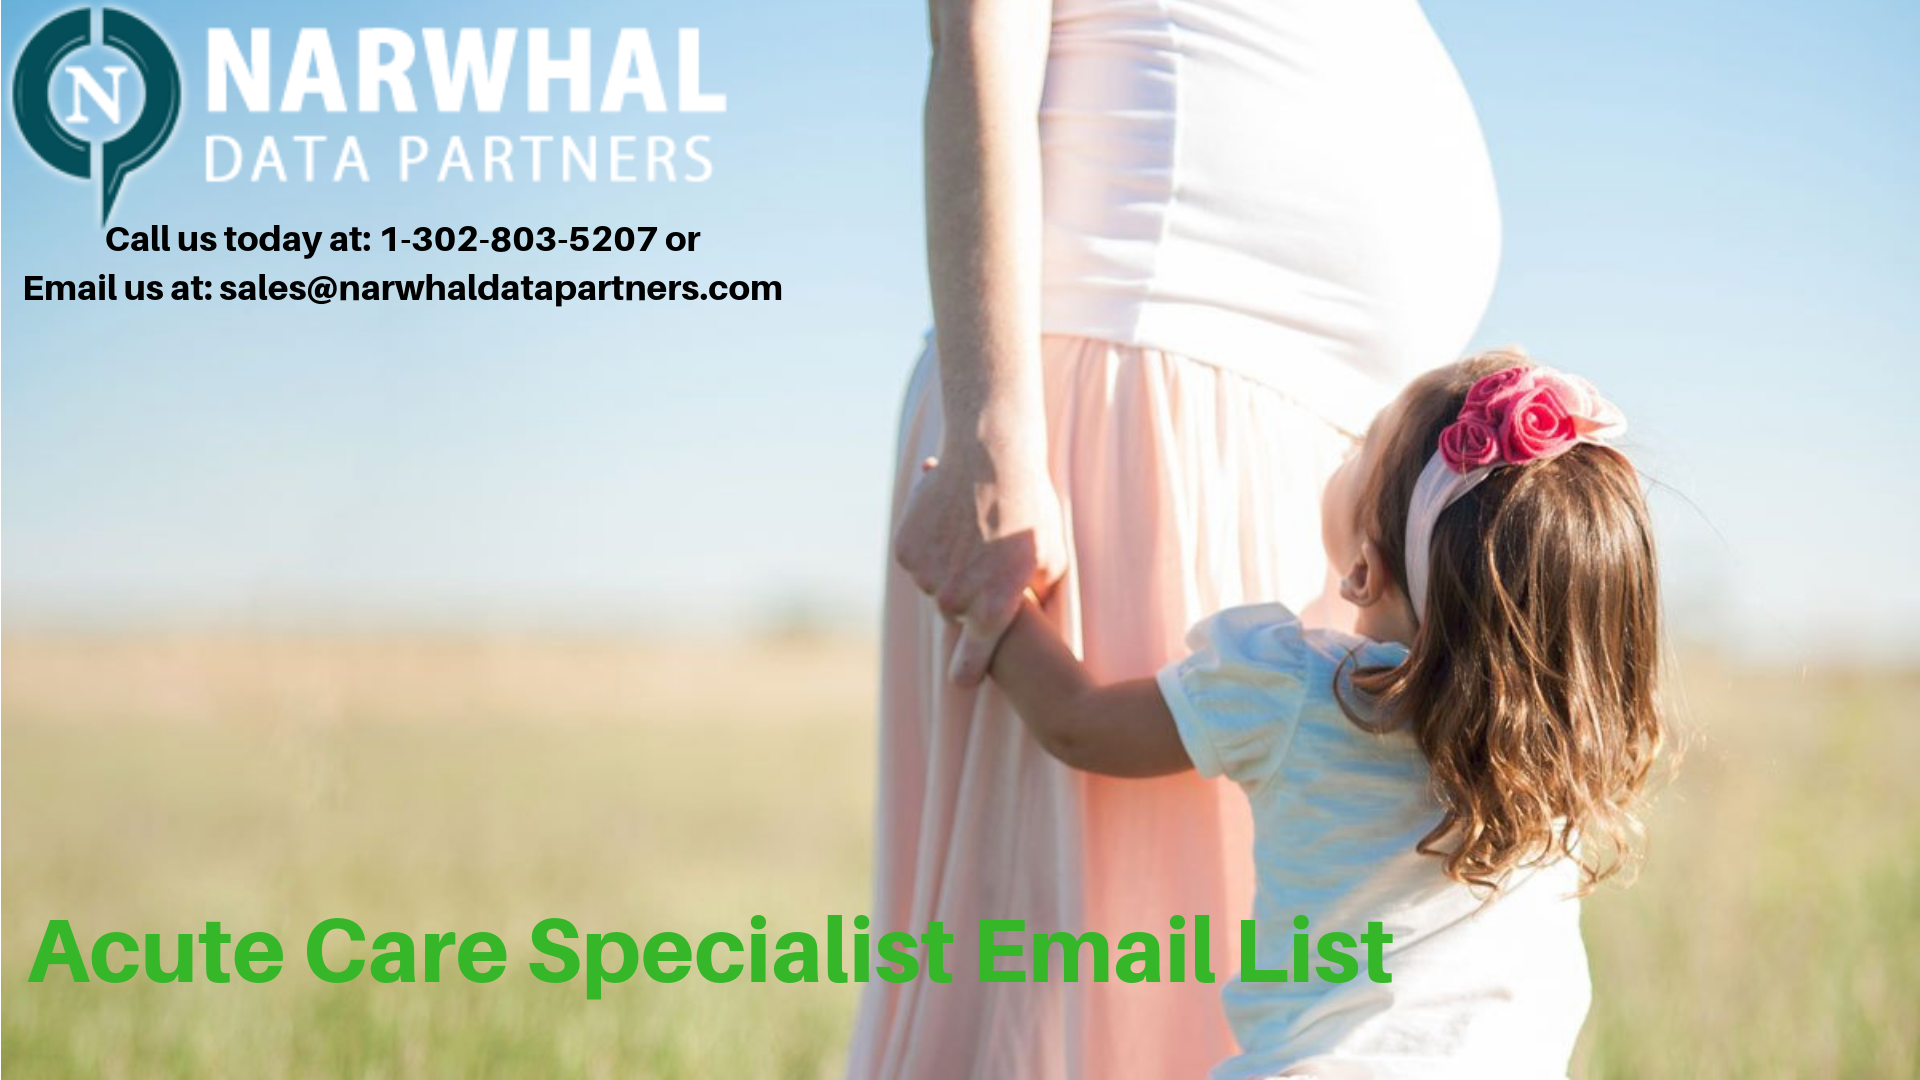 http://narwhaldatapartners.com/acute-care-specialist-email-list.html